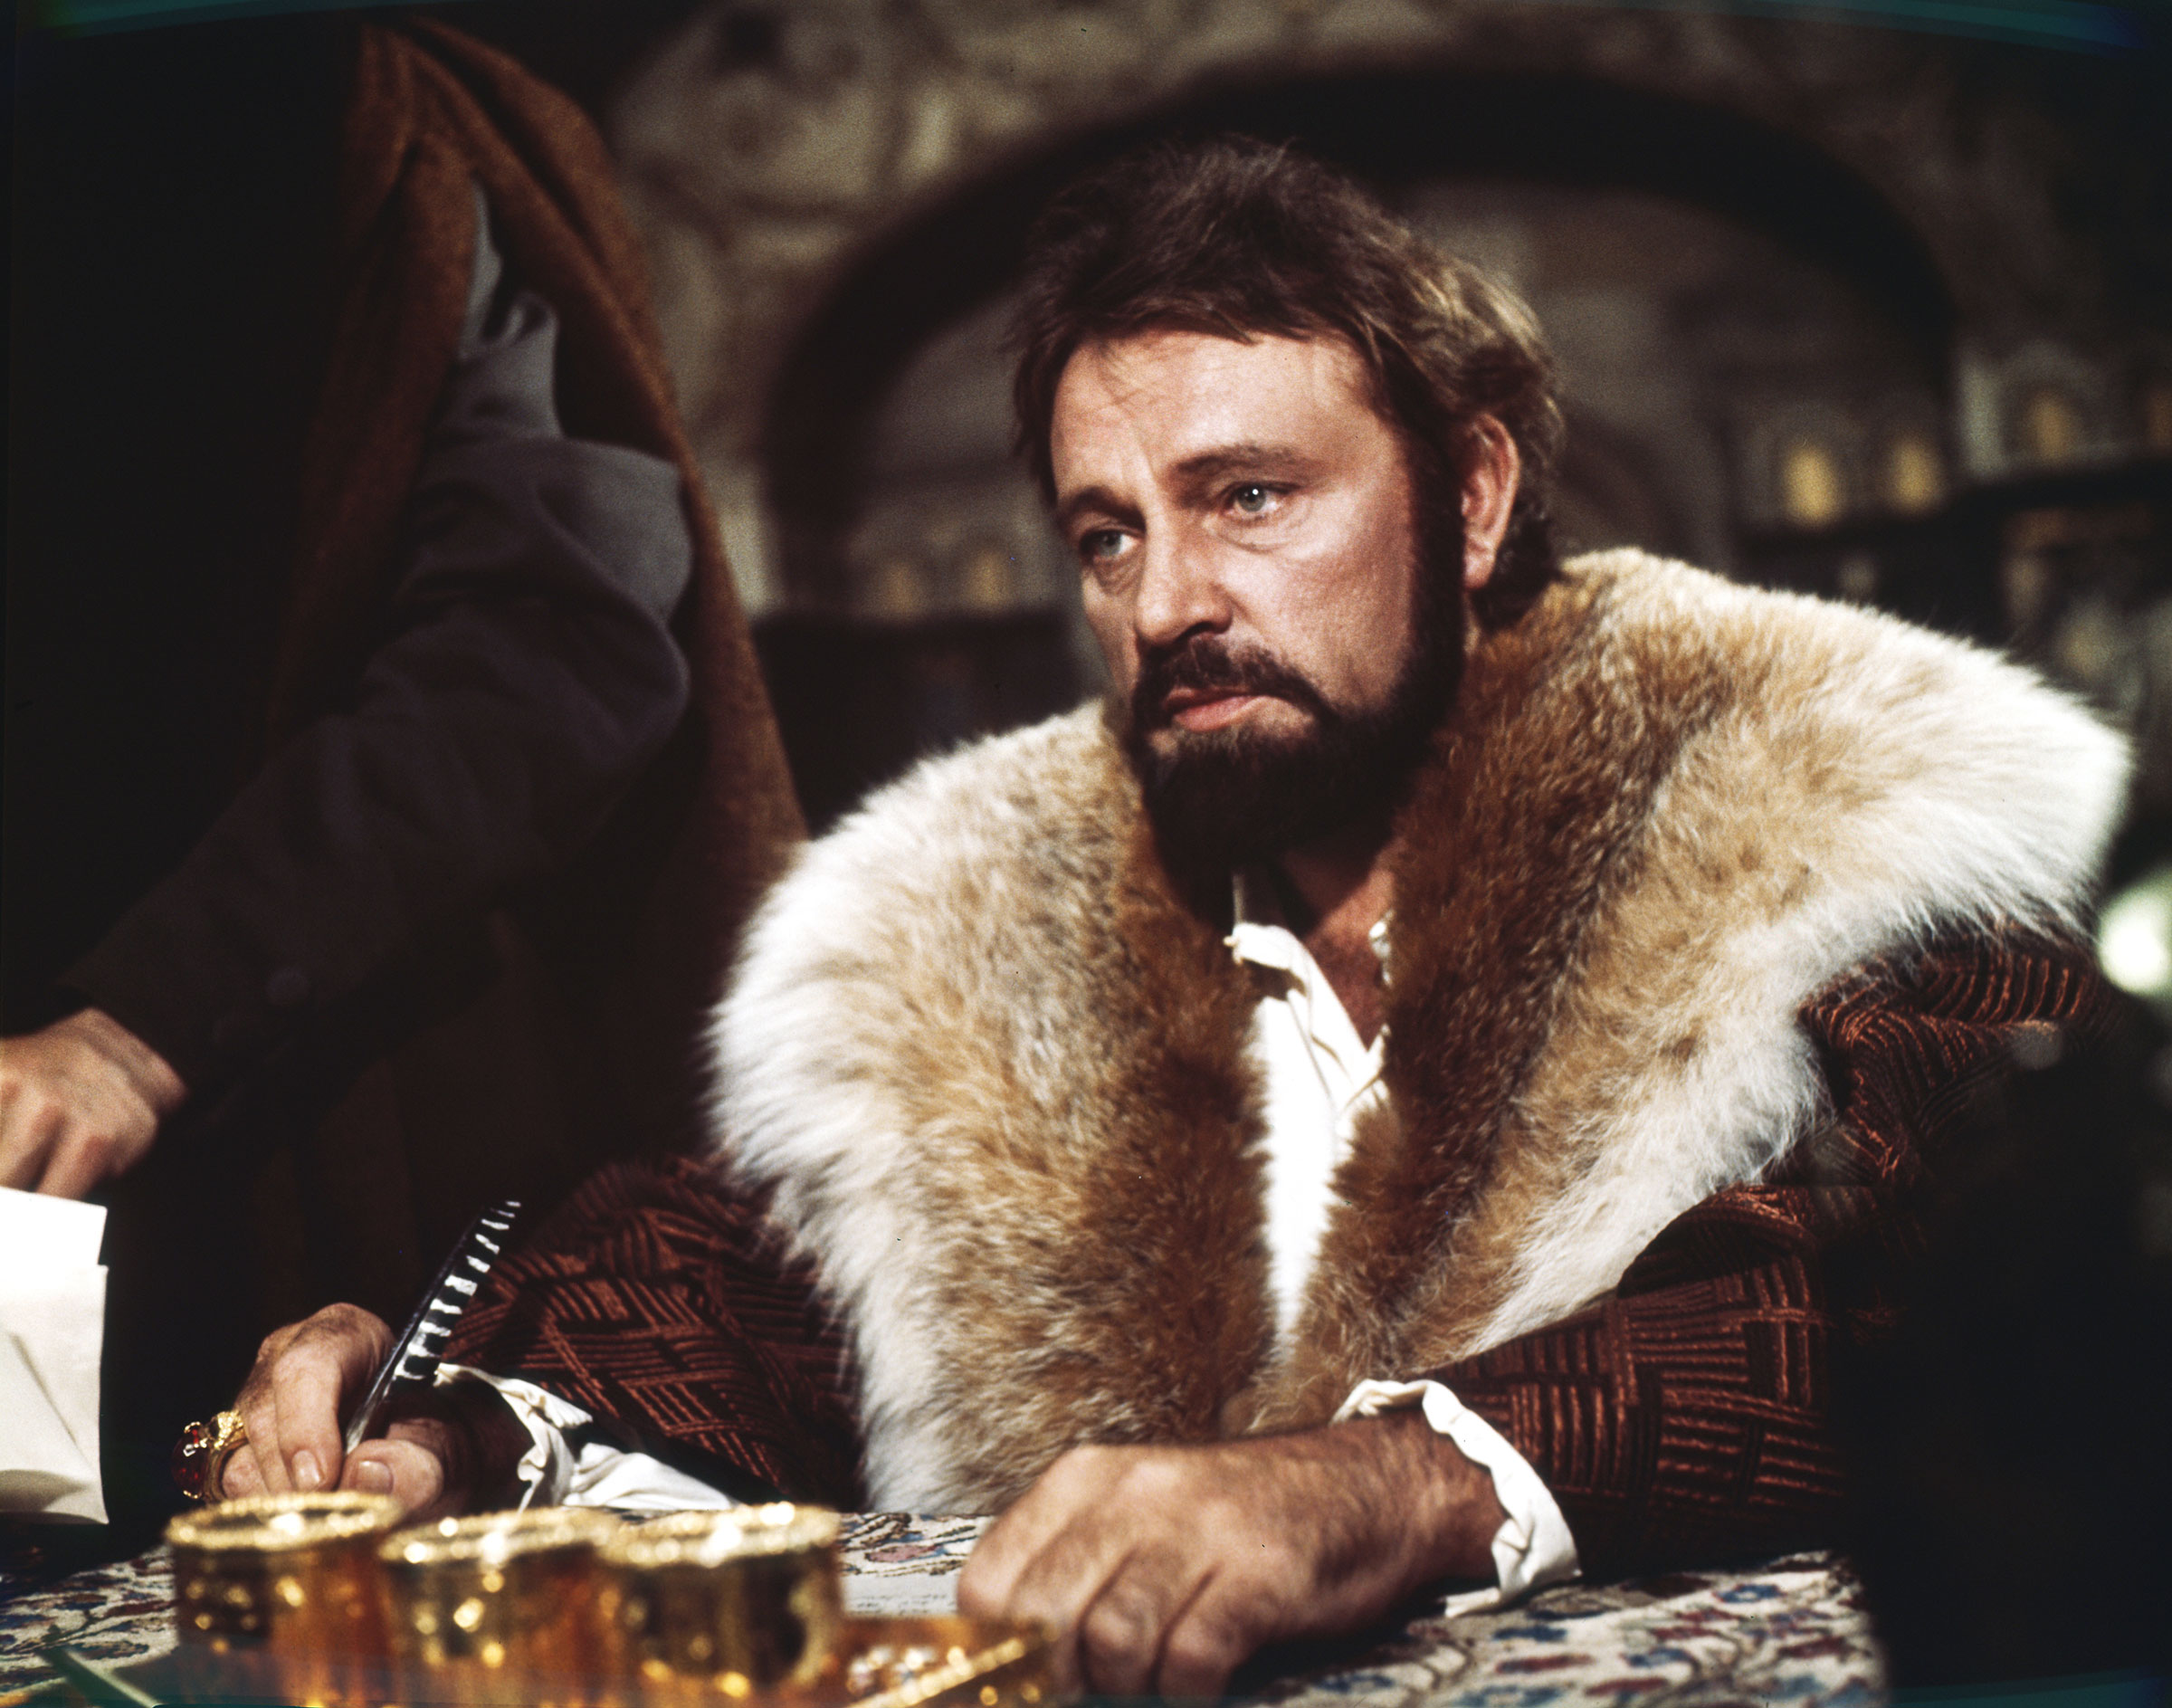 Richard Burton as King Henry VIII in 'Anne of the Thousand Days', 1969